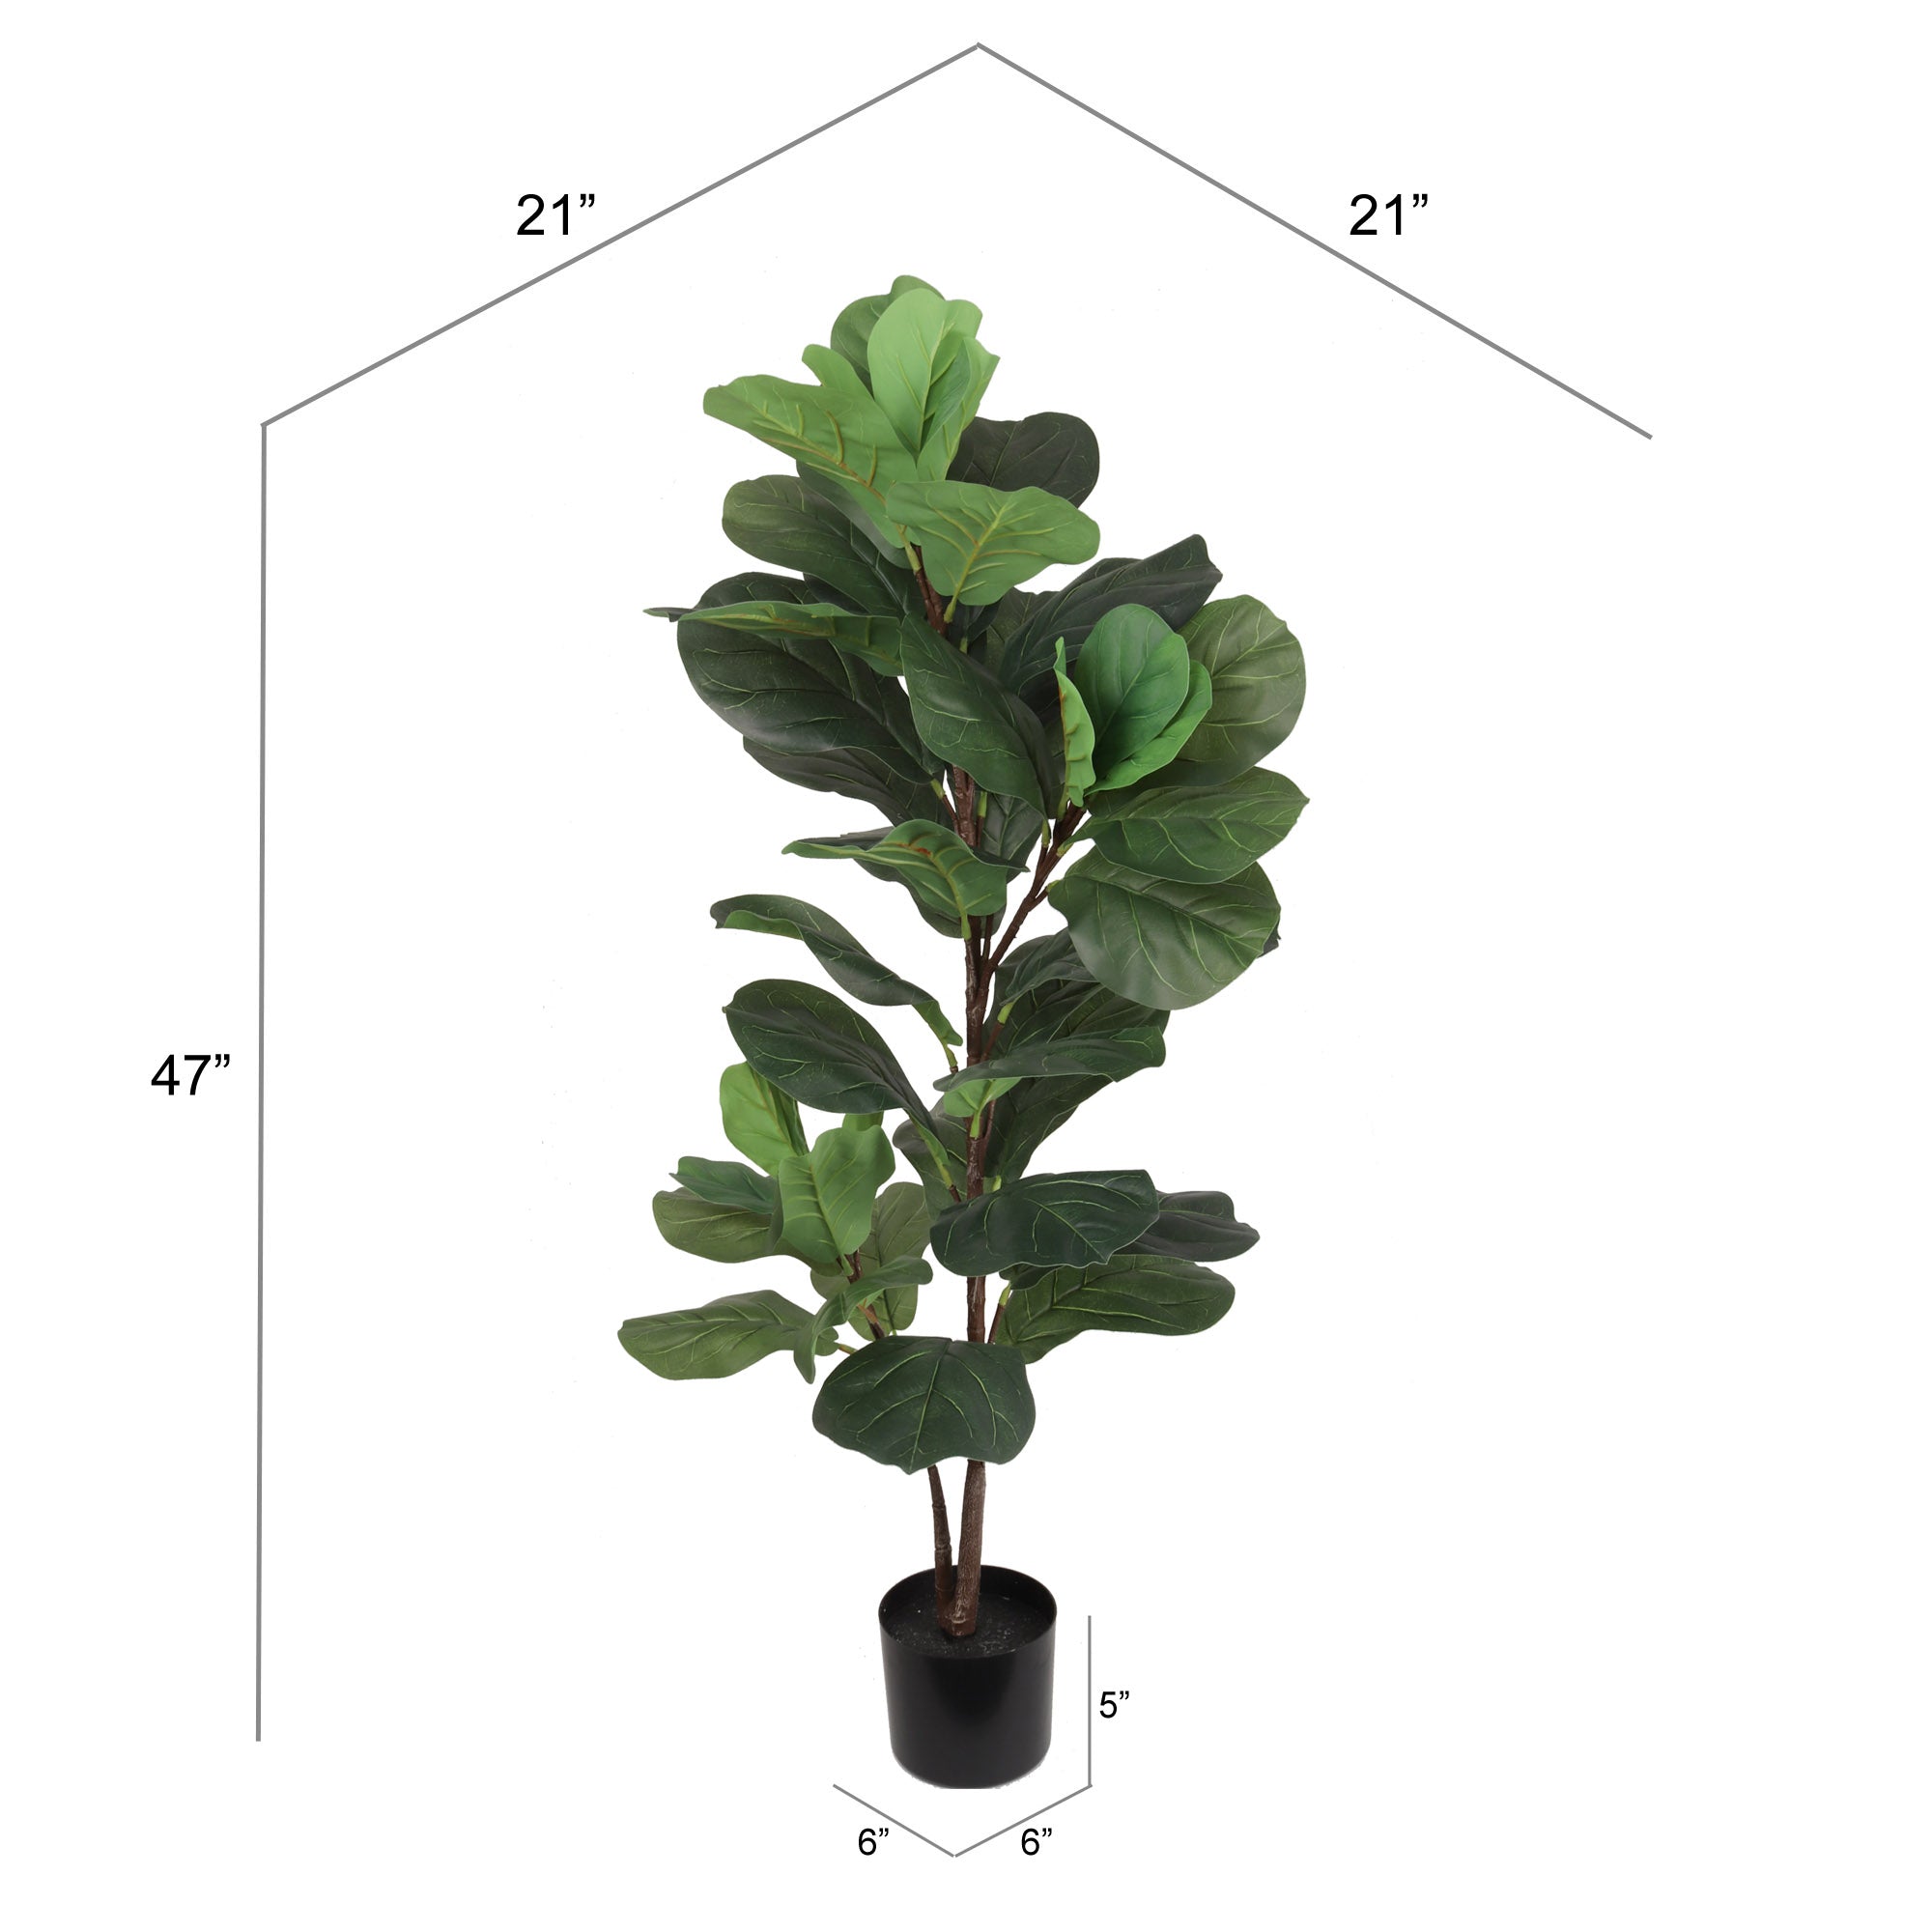 Silk Fiddle Leaf Ficus Tree 47" 35 Leaves House Plant in Black Pot House Plant ArtificialFlowers   